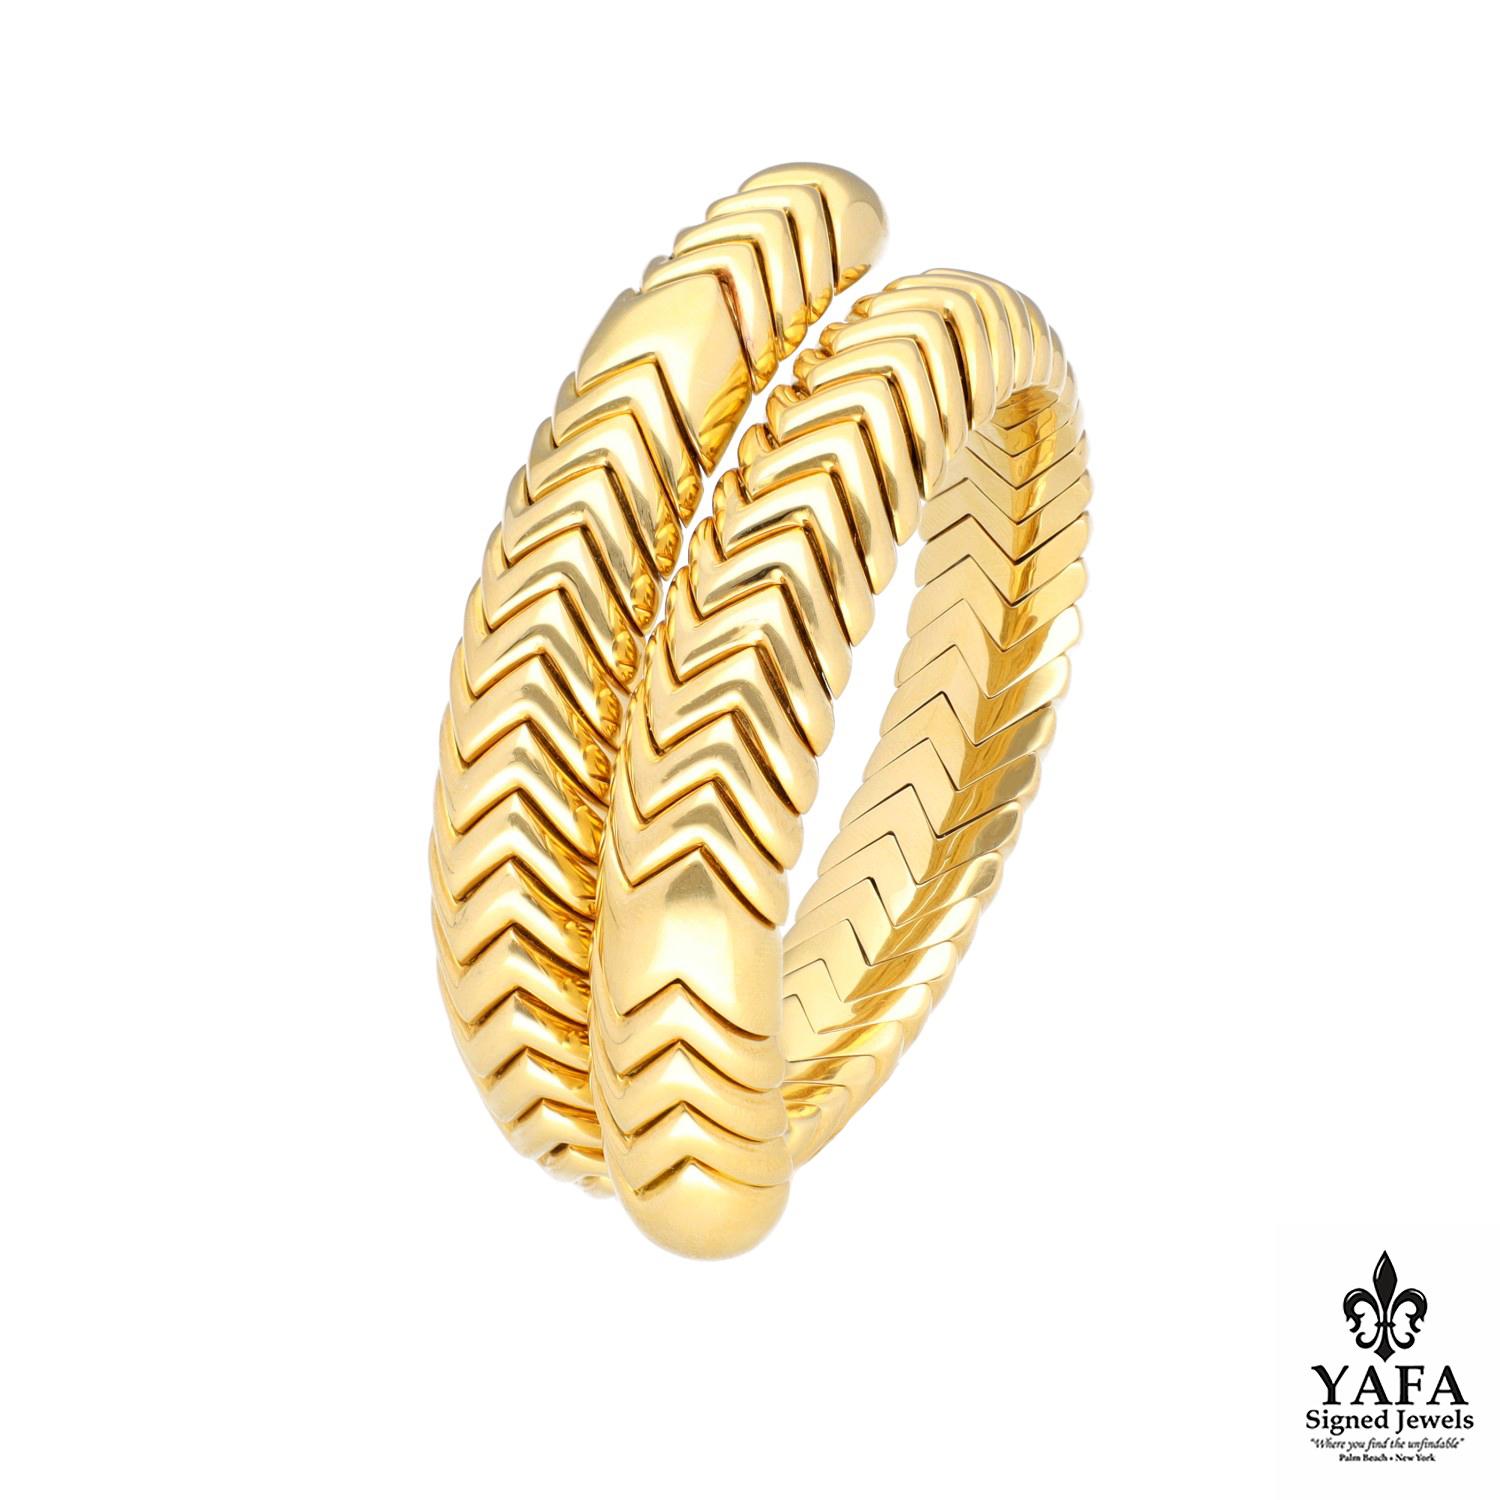 From the iconic Bvlgari Spiga Collection, a double row flexible bracelet designed with 18K yellow gold chevron links. Signed Bvlgari; circa 1980s

Vintage and Estate Collection